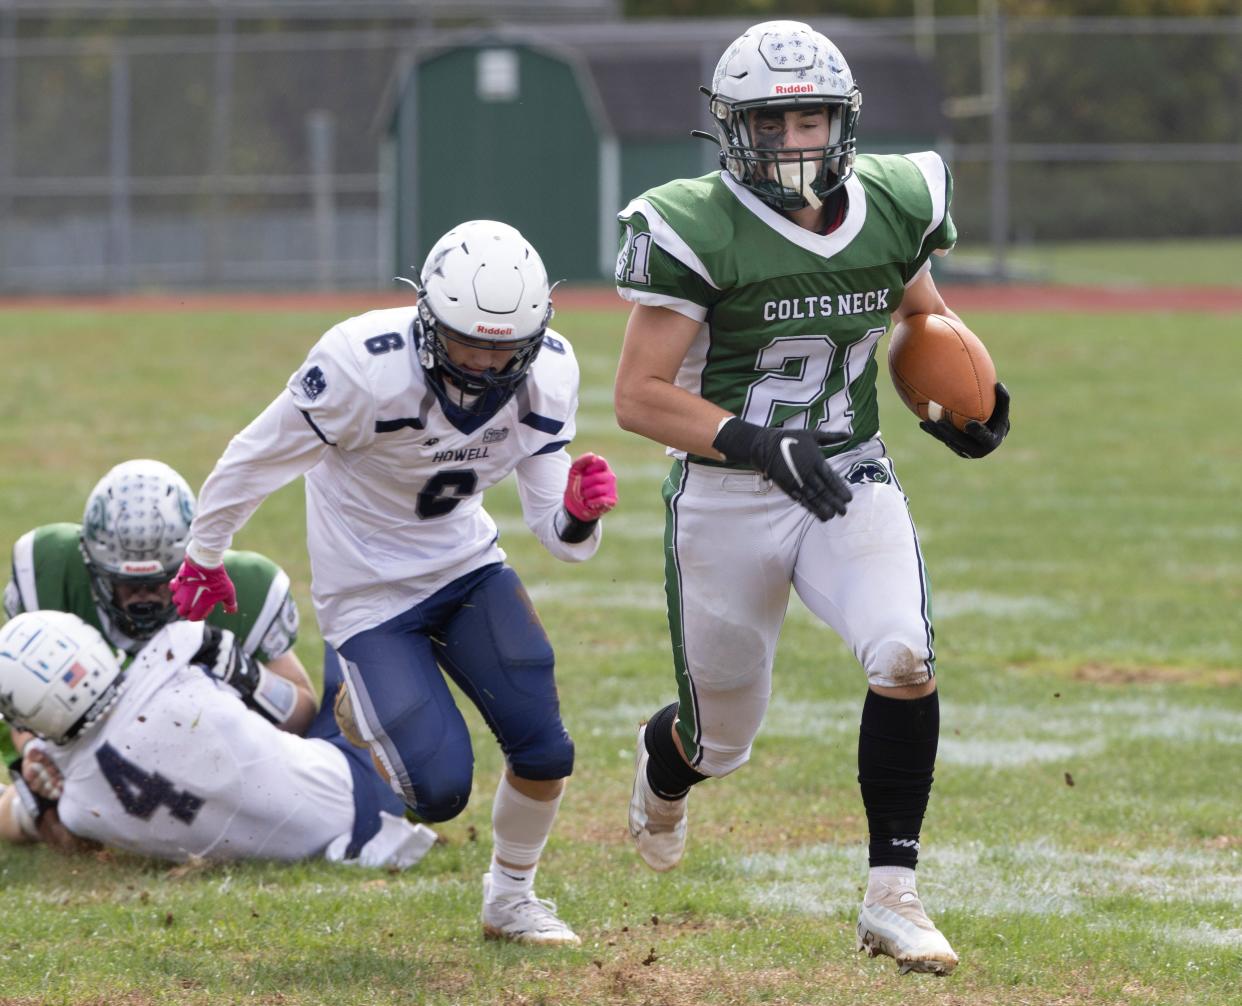 Colts Neck running back Chris Scully, shown last year, ran for 191 yards and four TDs Saturday in Colts Neck's 41-0 win over Toms River South in a NJSIAA South Group 4 quarterfinal.